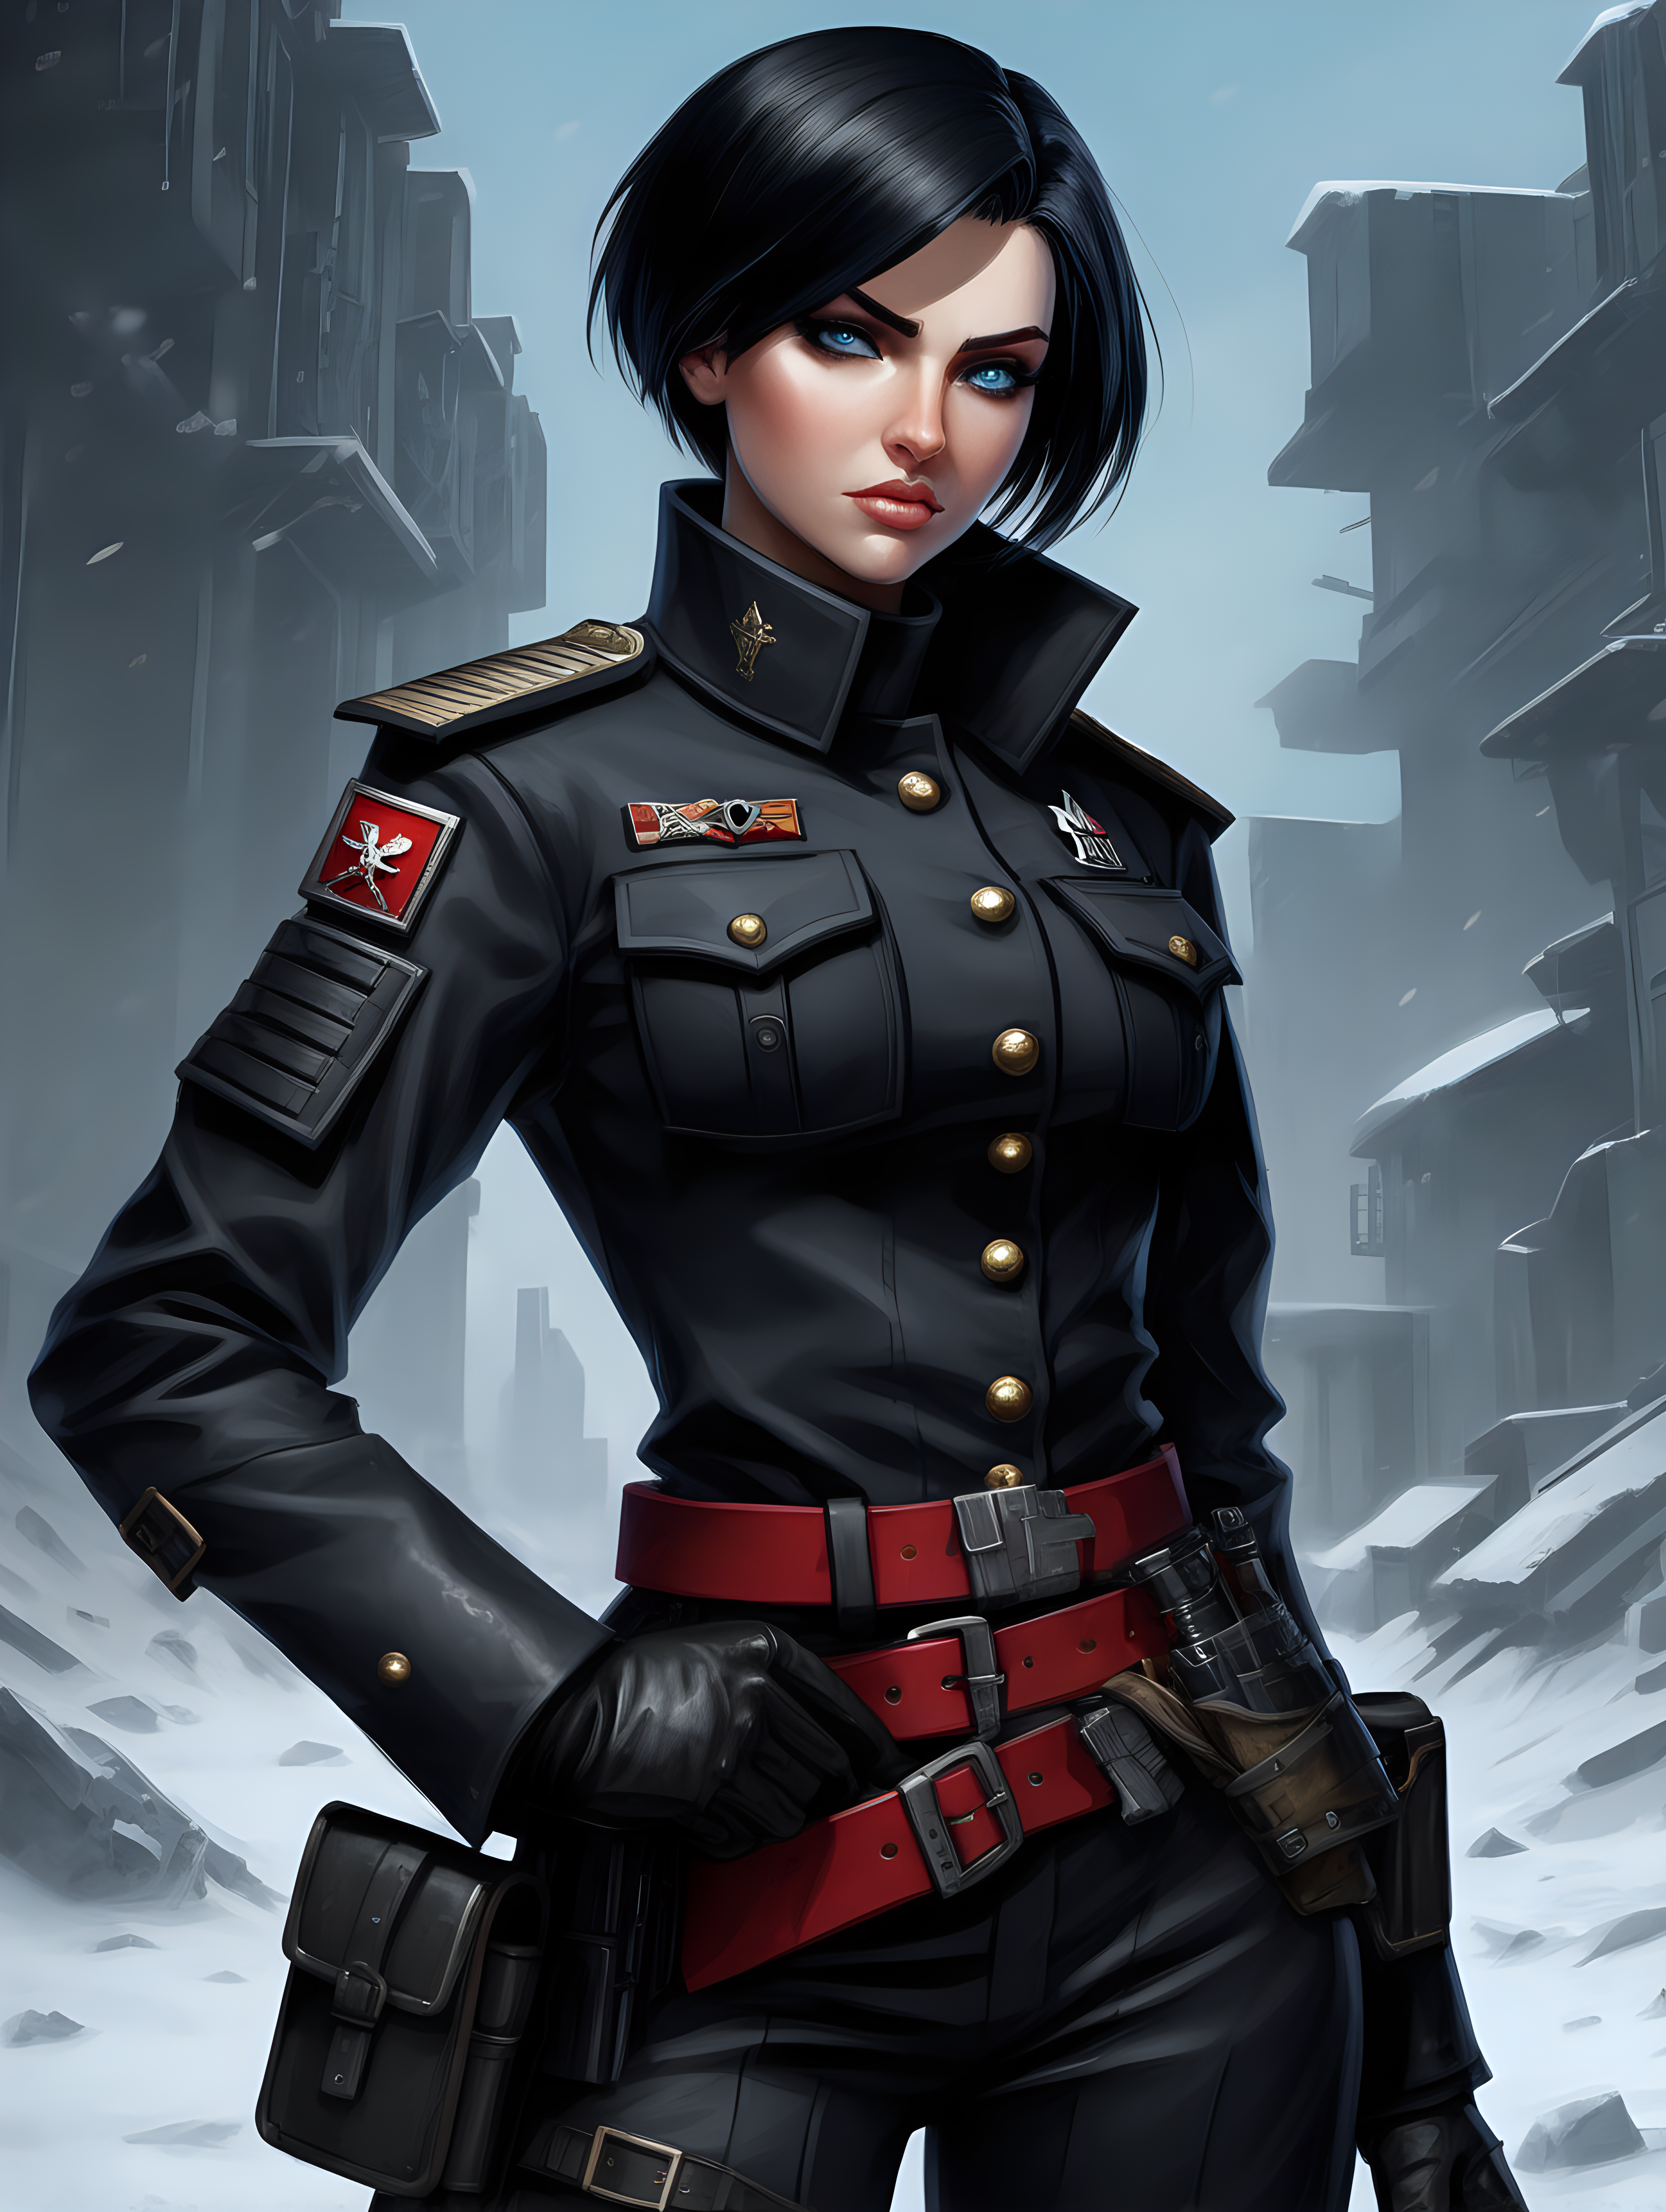 Warhammer 40K young Commissar woman. She has an hourglass shape. She has raven black hair. She has a very short hair style similar to what Maya, from Borderlands 2, has. Dark black uniform. Belt has a lot of pouches, grenades, black pistol magazines, and a black holster attached. Bandolier around waist. Her dark black uniform jacket fits perfectly and is closed up. She has a lot of eye shadow. Background scene is snowy trench line. She has icy blue eyes. 